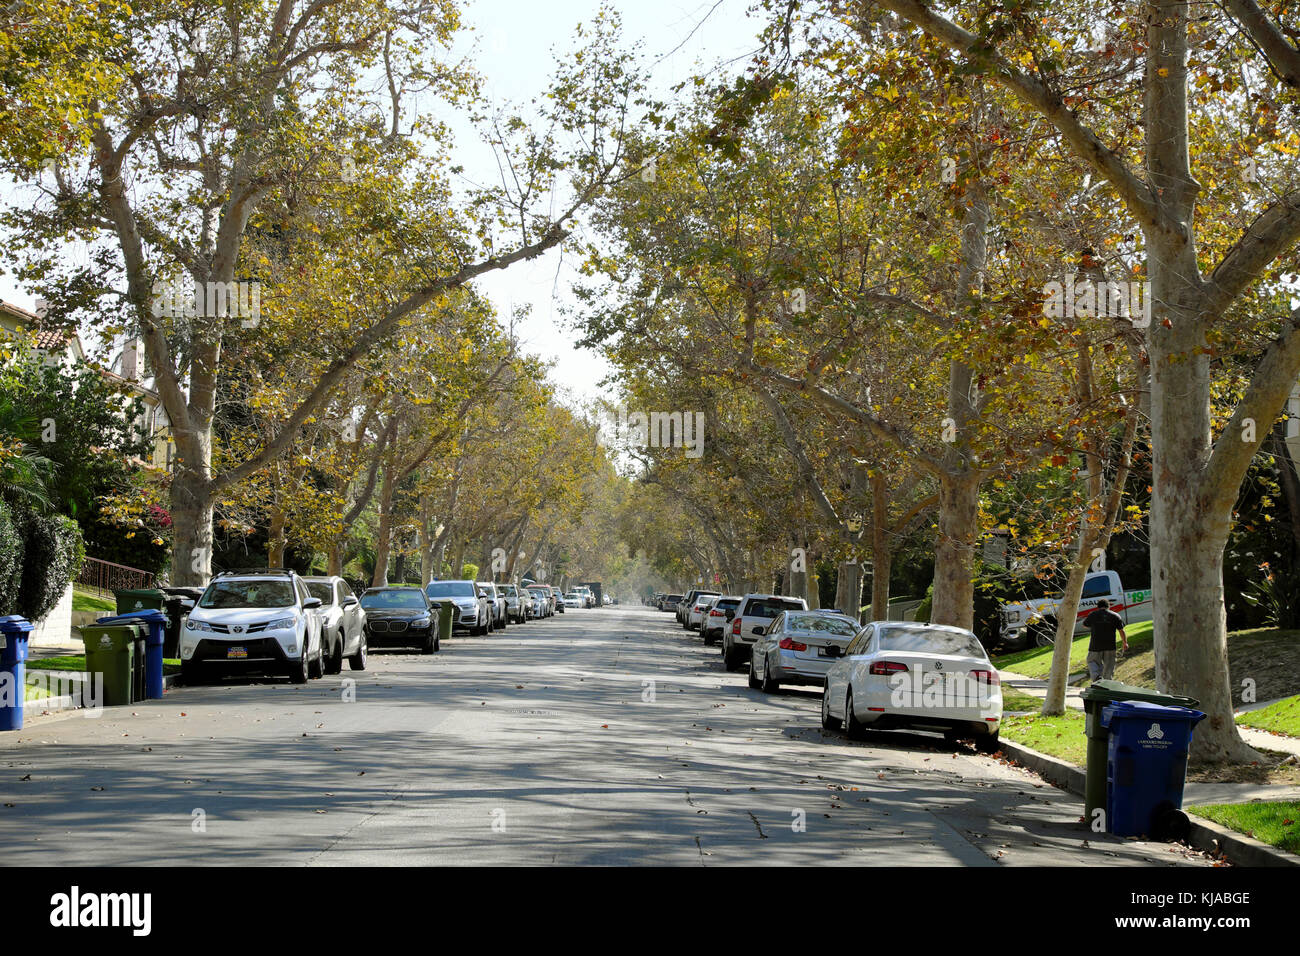 West Hollywood residential area with parked cars in a leafy street view in autumn near Beverly Boulevard in Los Angeles, California USA   KATHY DEWITT Stock Photo